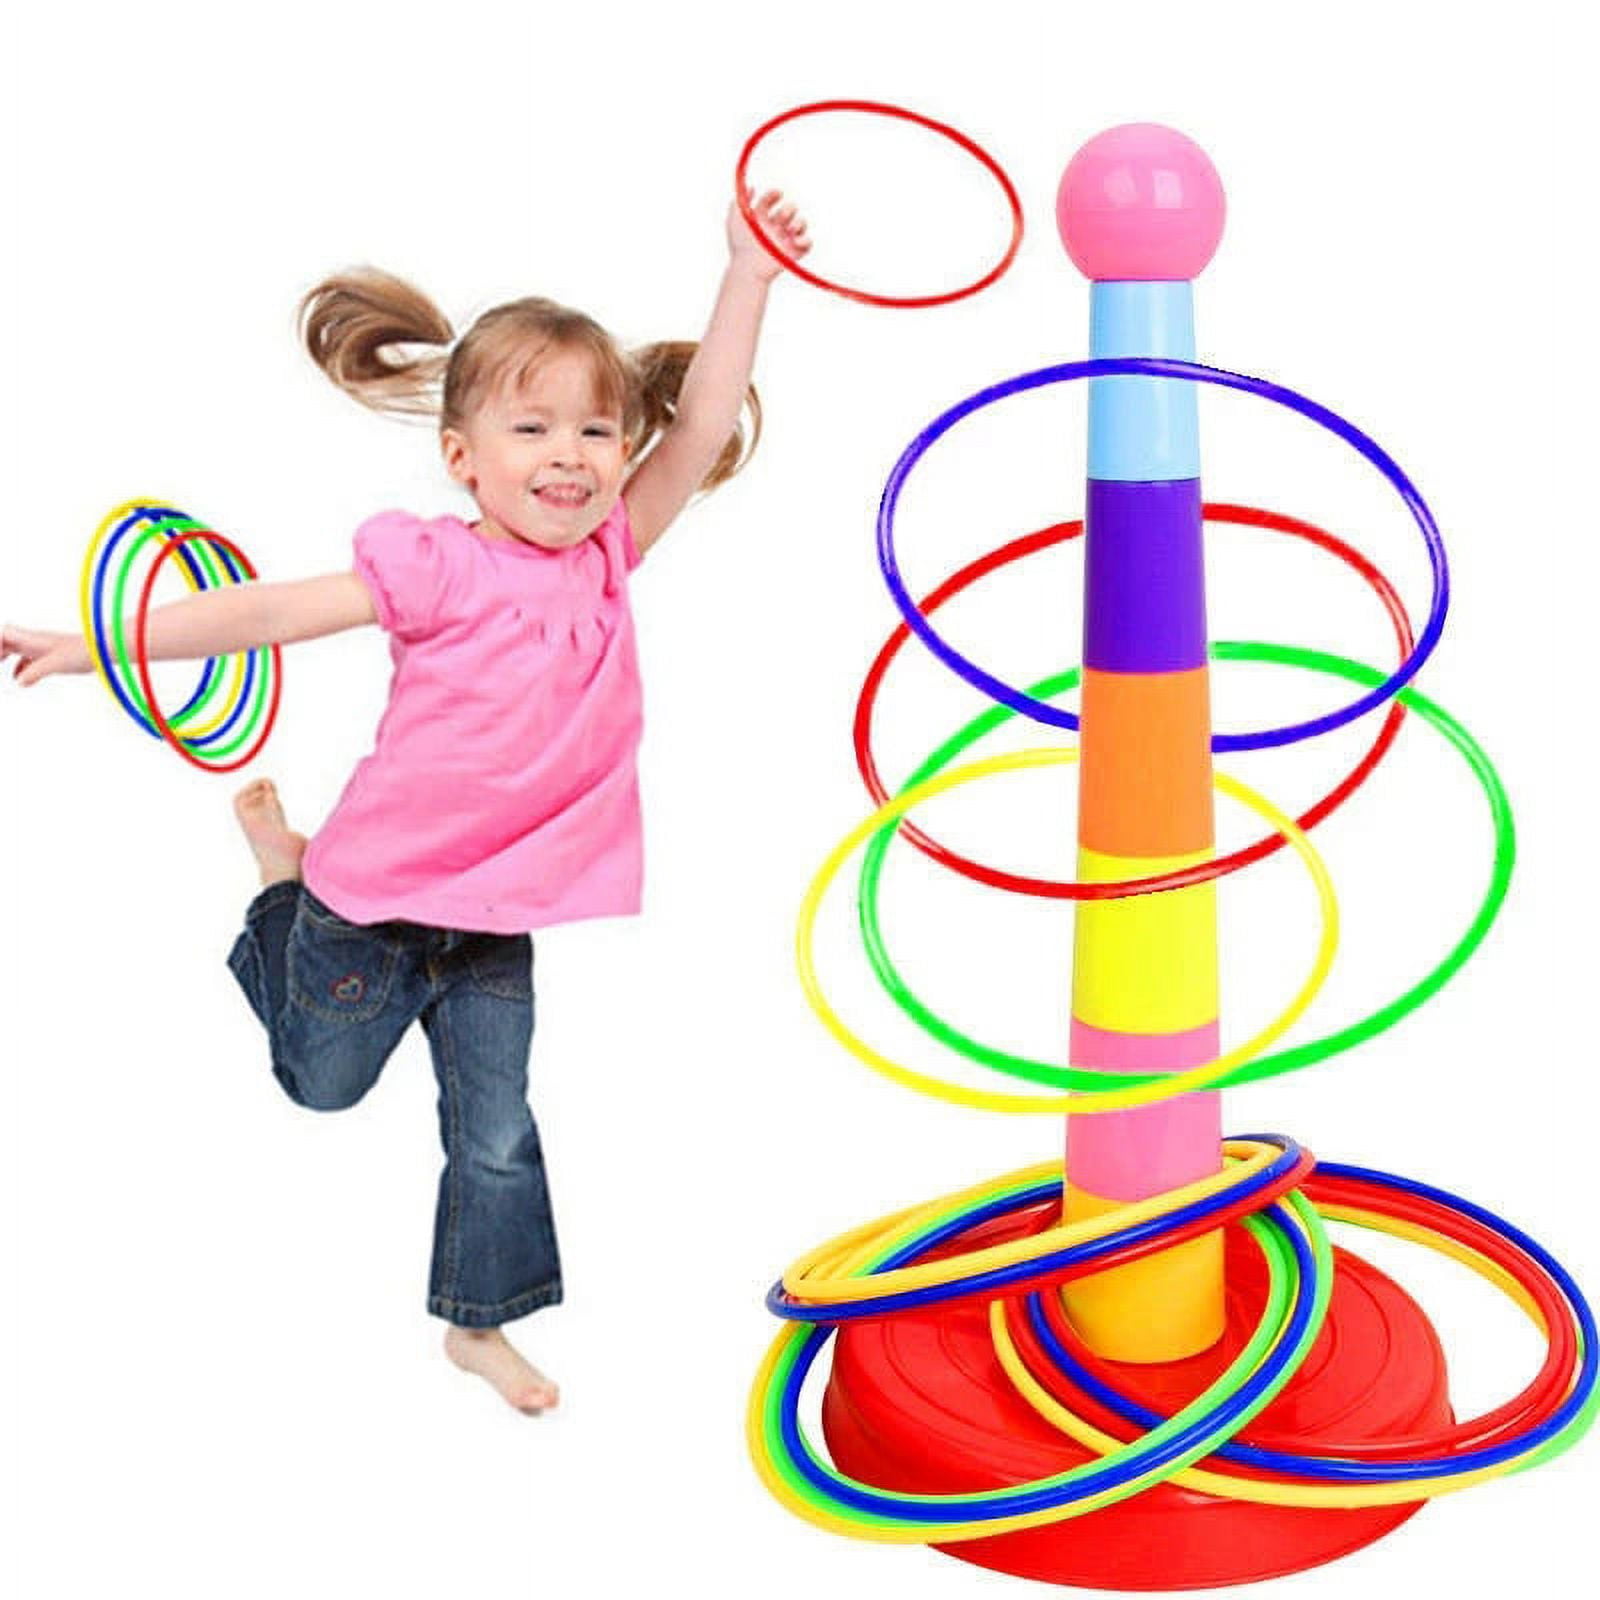 Ydds Ring Toss Game for Kids Indoor & Outdoor Game for Family and Adults with 5 Poles 2 Bases and 16 Rings in 4 Colors Soft Foam Toy for Kids Back